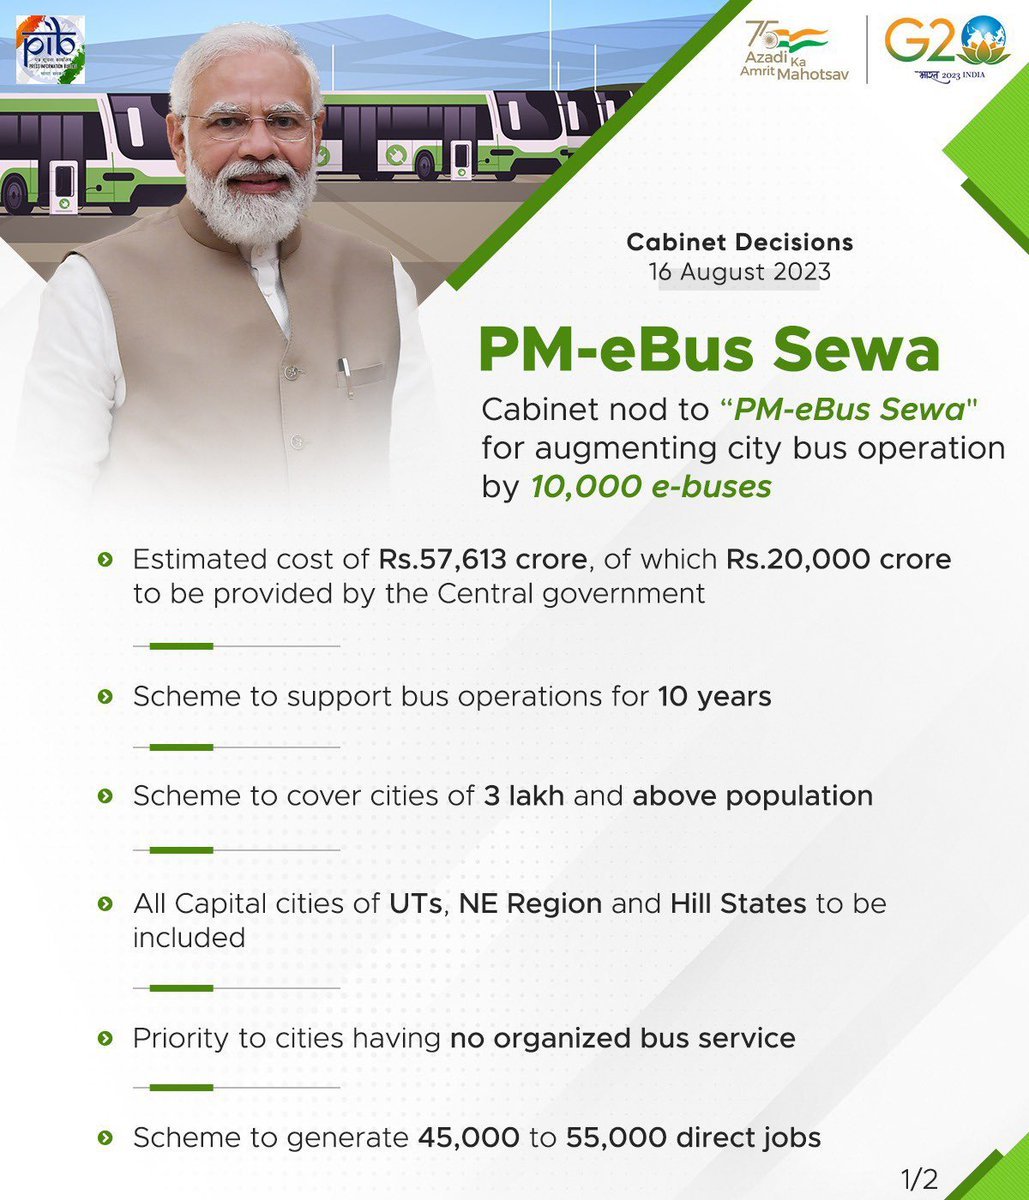 Narendra Modi on Twitter: "PM-eBus Sewa will redefine urban mobility. It will strengthen our urban transport infrastructure. Prioritising cities without organised bus services, this move promises not only cleaner and efficient transport